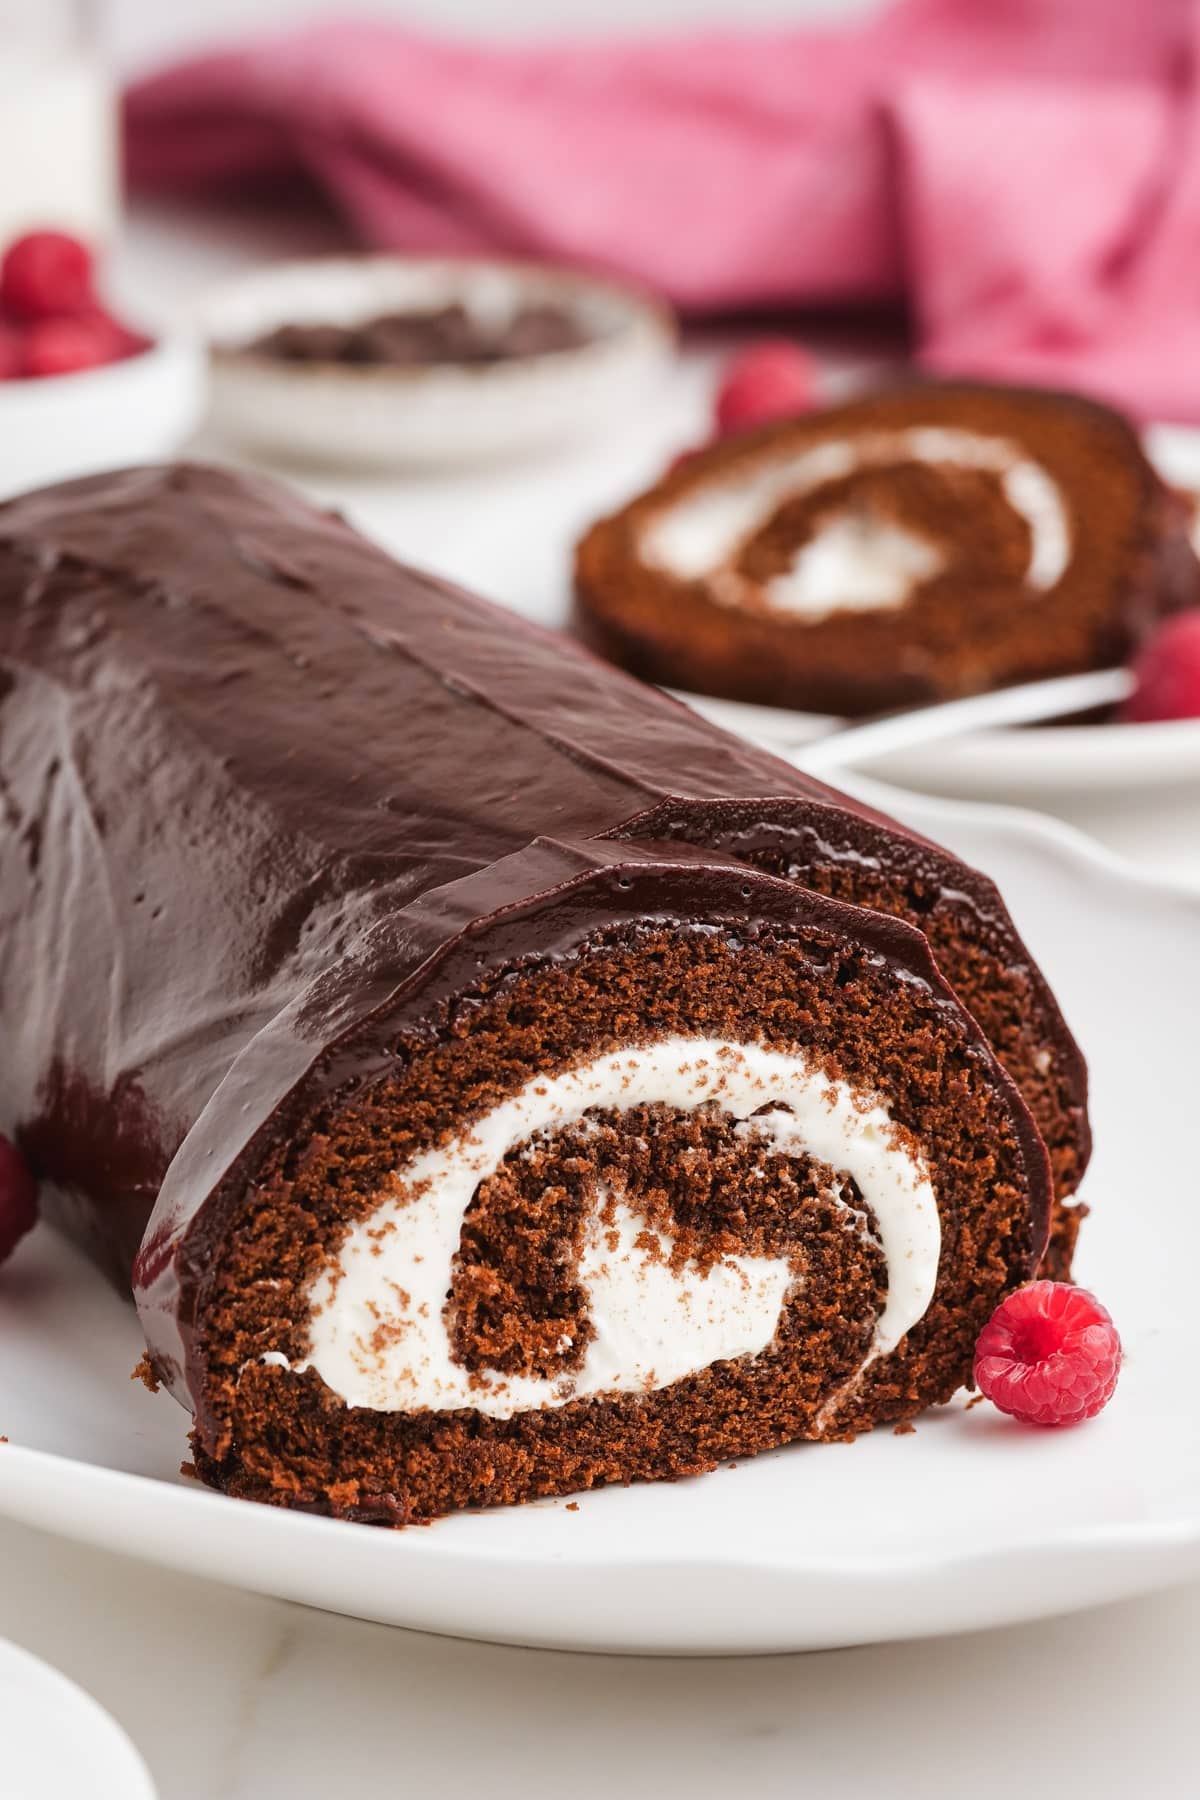 chocolate swiss roll on a plate with raspberries